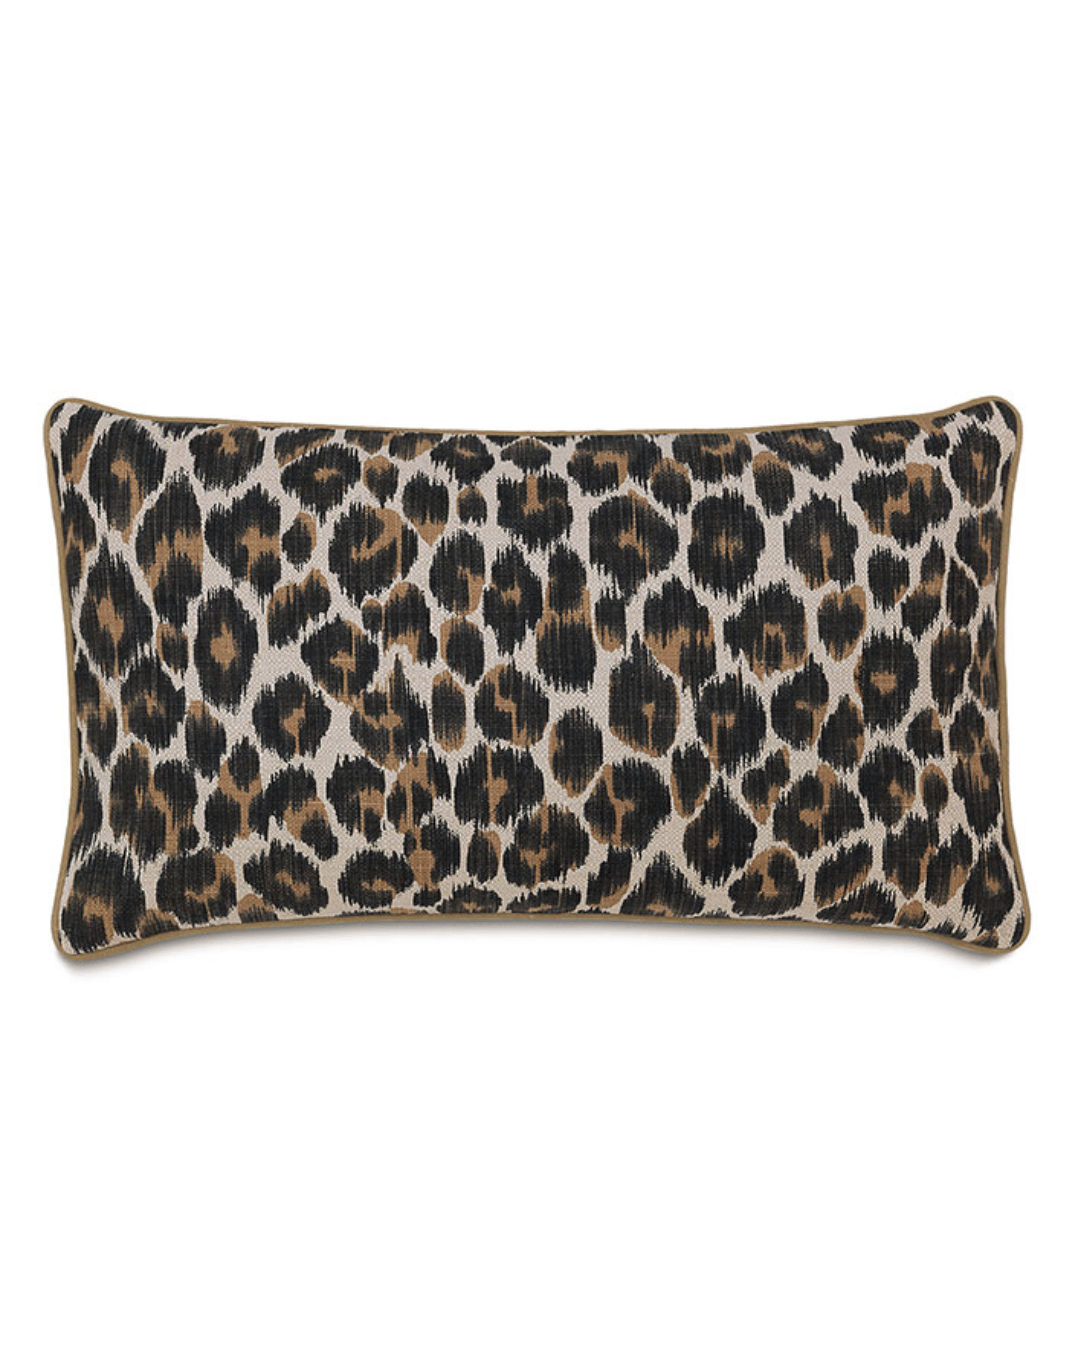 Rectangular Gira Spot pillow featuring a leopard print pattern with an elegant gold trim on the edges, isolated on a white background, perfect for a Scottsdale Arizona bungalow by Eastern Accents.